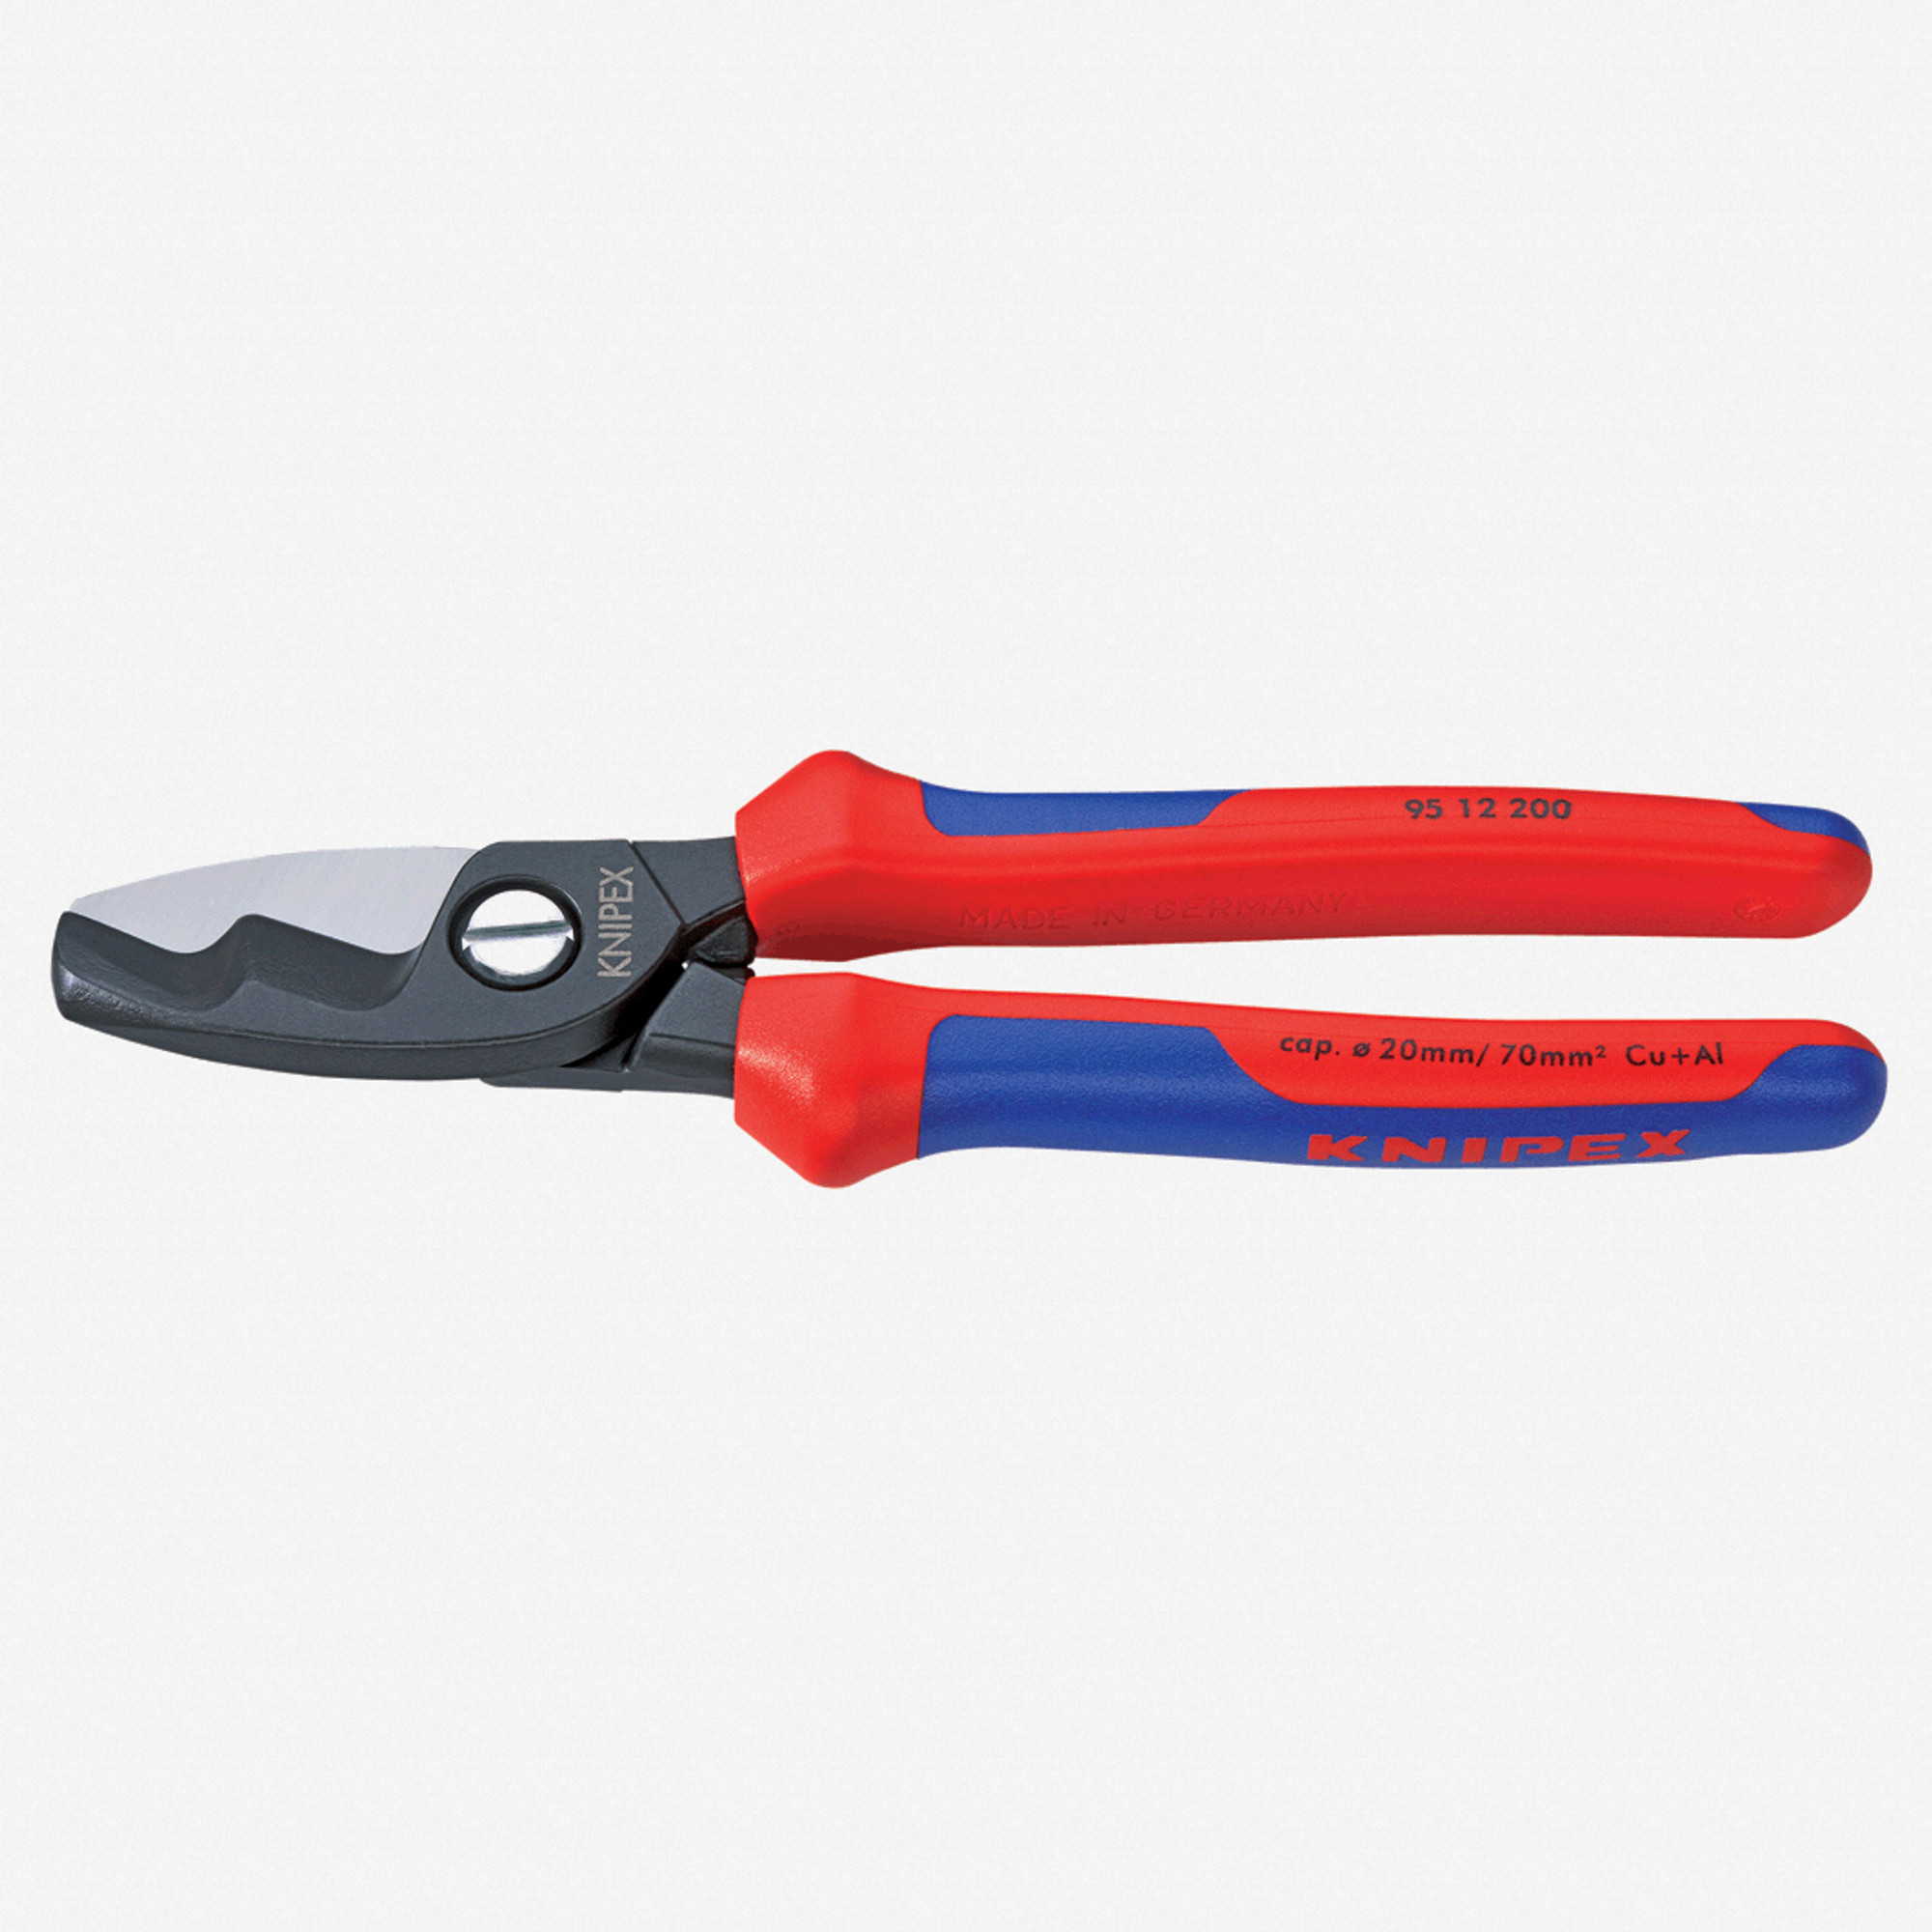 Knipex 8 Cable Shears with twin cutting edge - MultiGrip